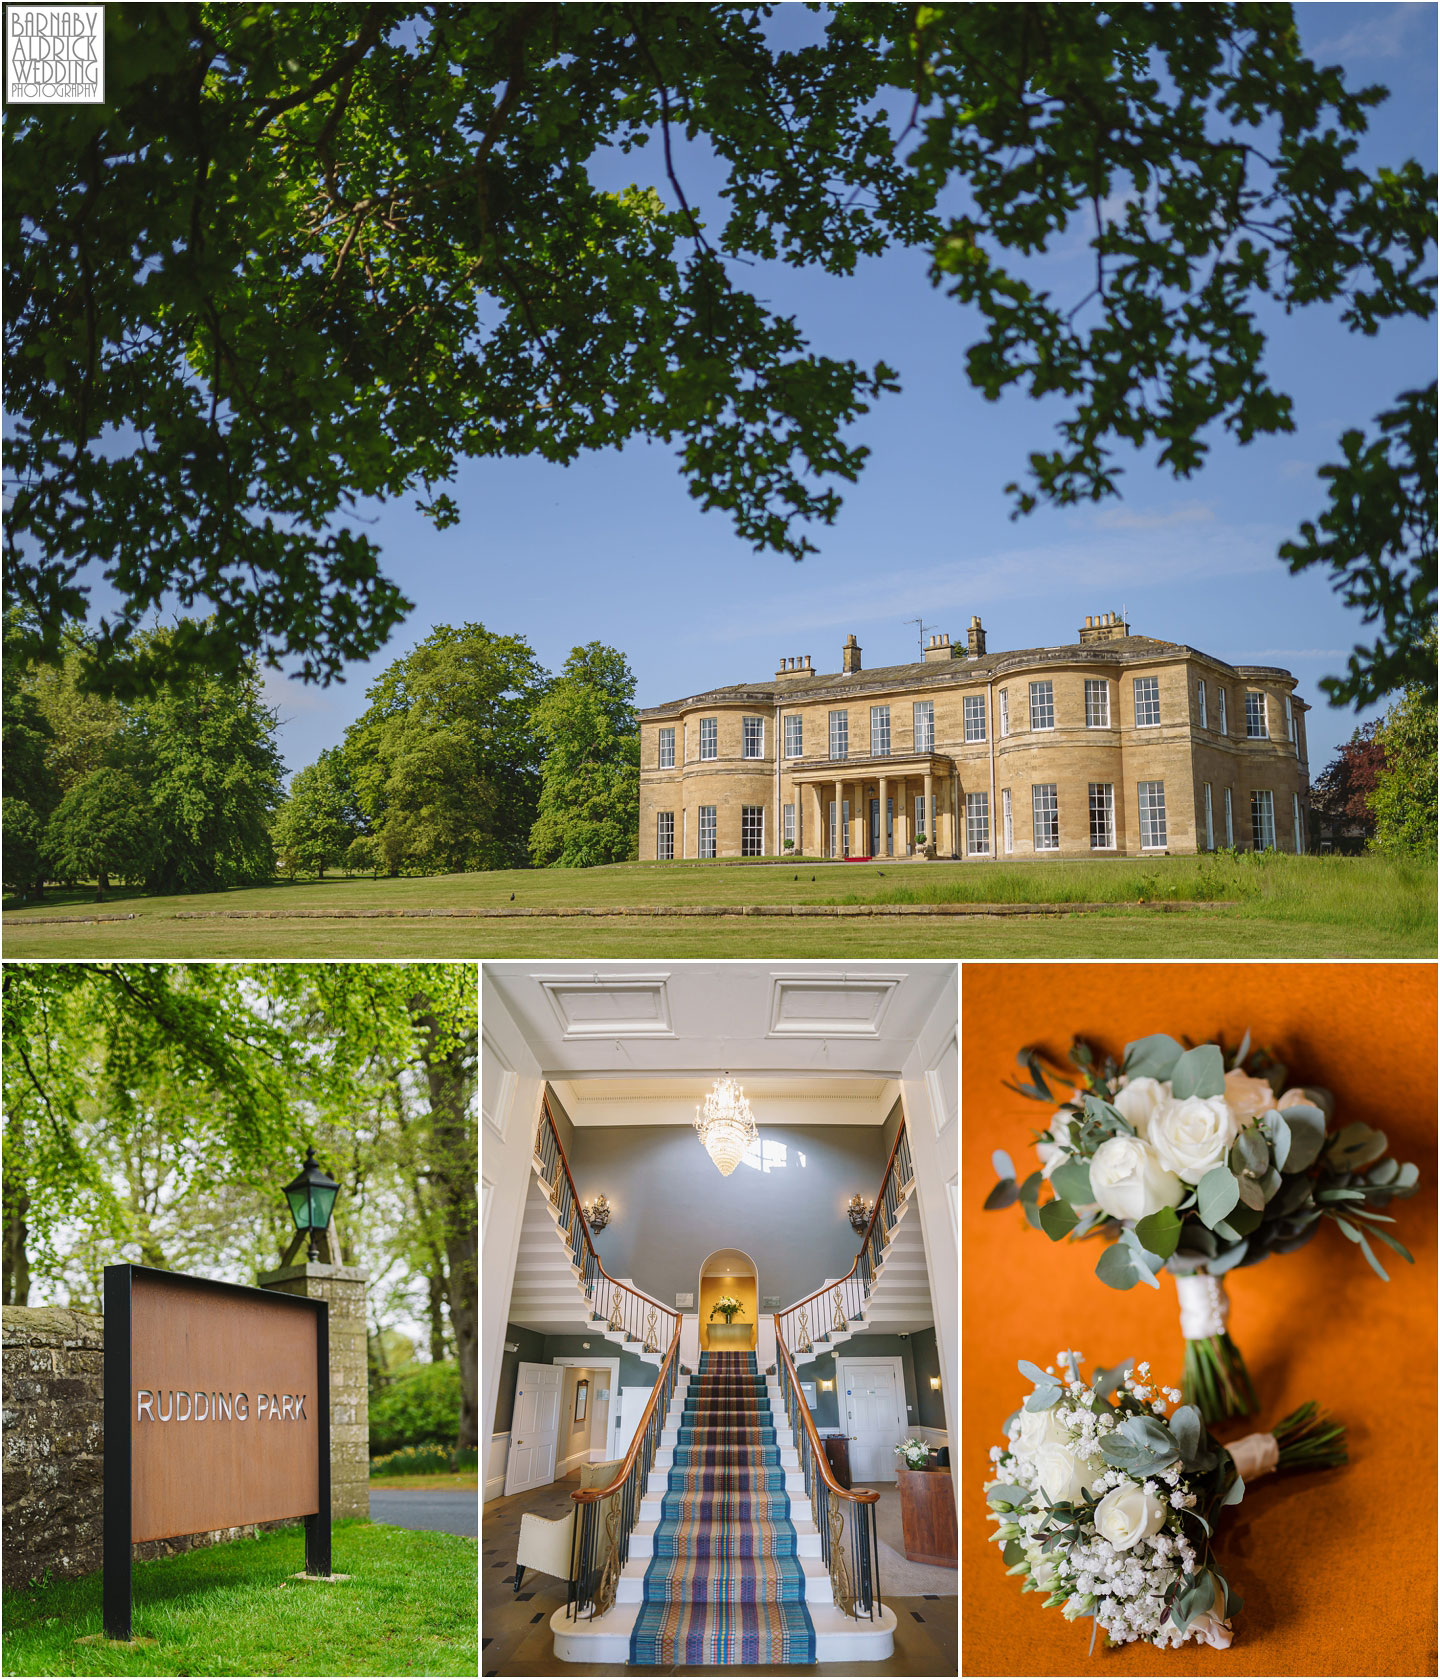 Wedding Photos at Rudding Park Hotel and Spa in Yorkshire